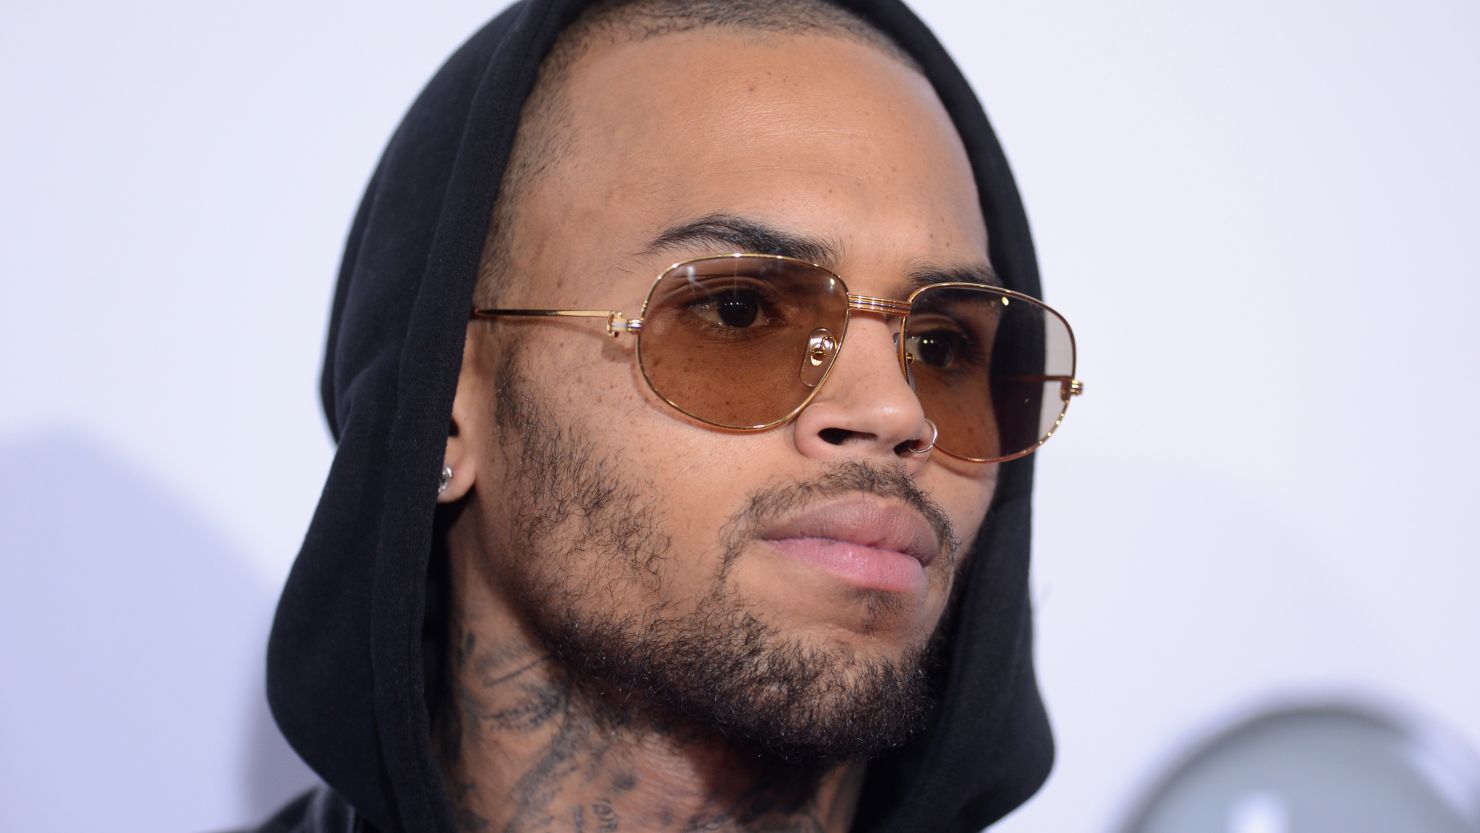 Chris Brown attends the 40th American Music Awards held on November 18, 2012 in Los Angeles, California.